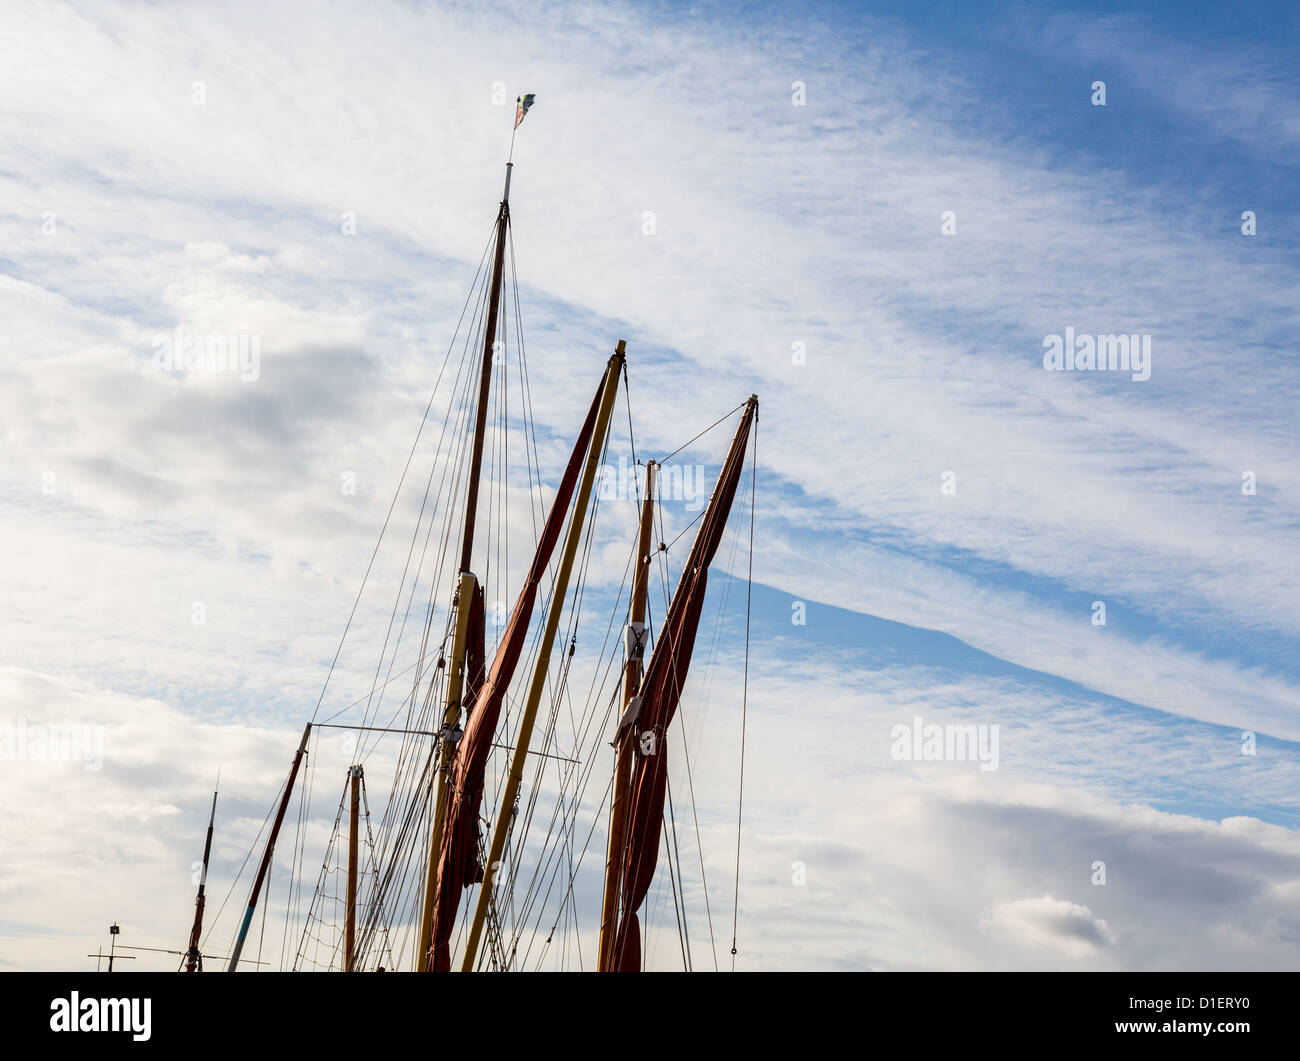 Thames sailing ship or barge with masts and sails by dock in Faversham Kent UK Stock Photo